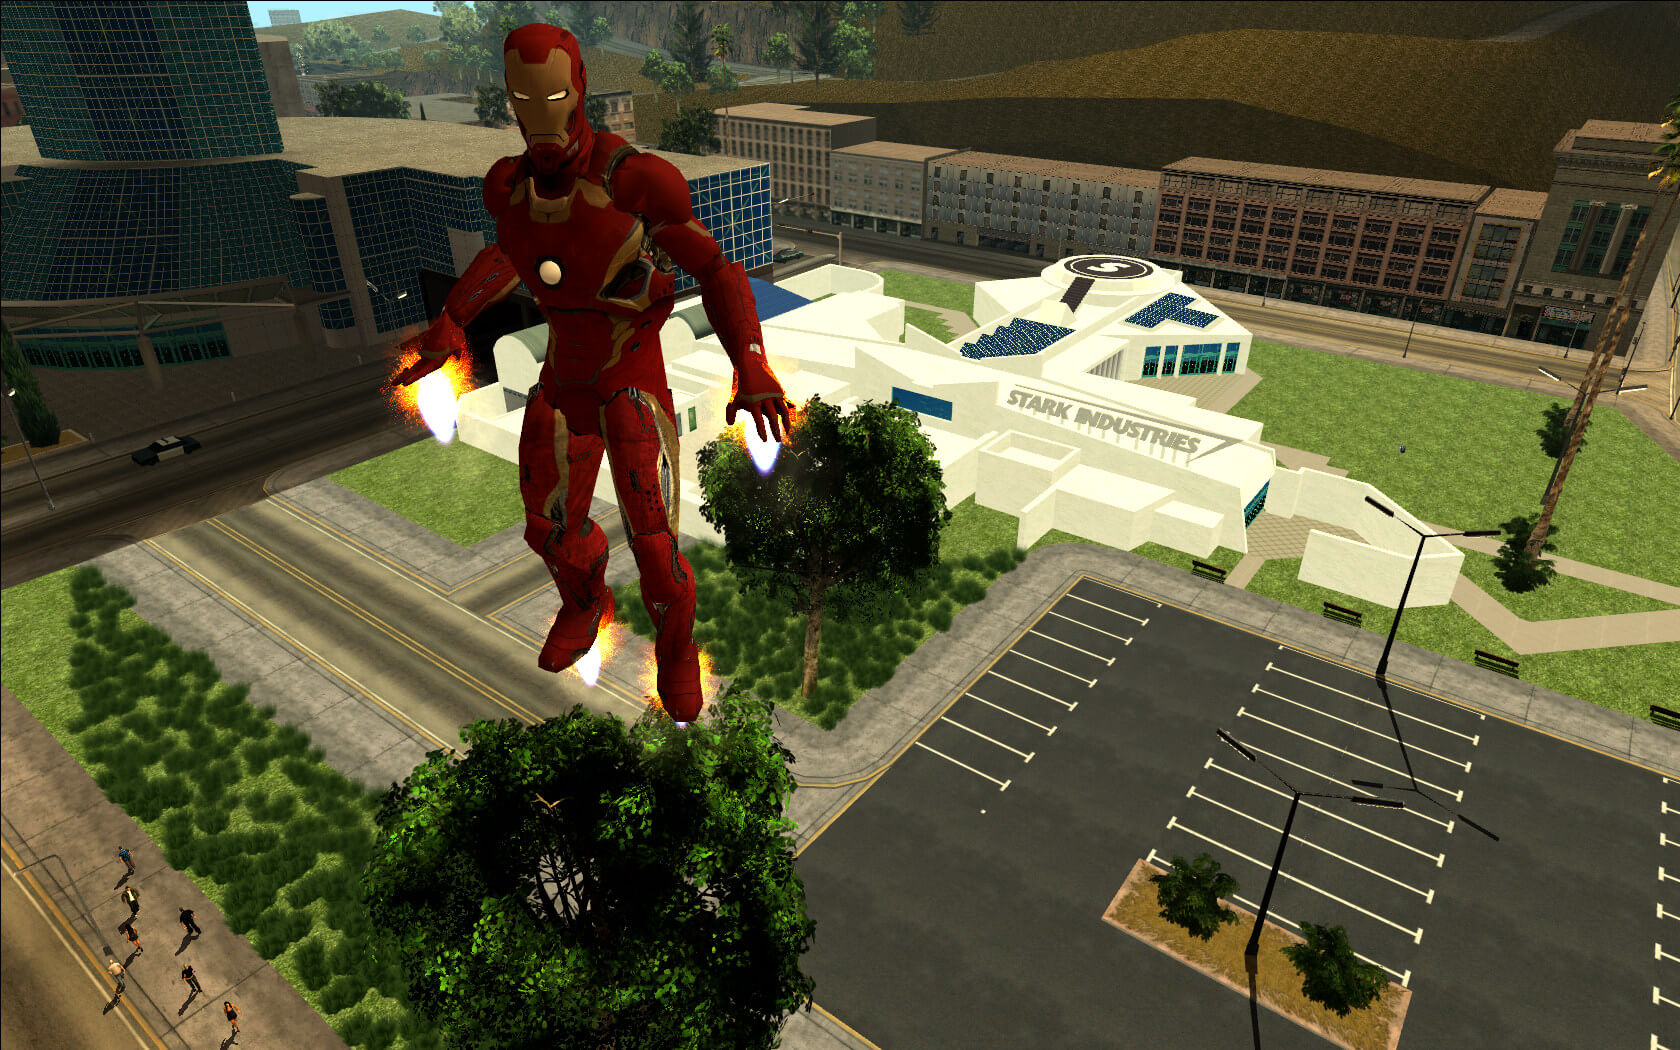 Iron Man Mod released for Grand Theft Auto: San Andreas